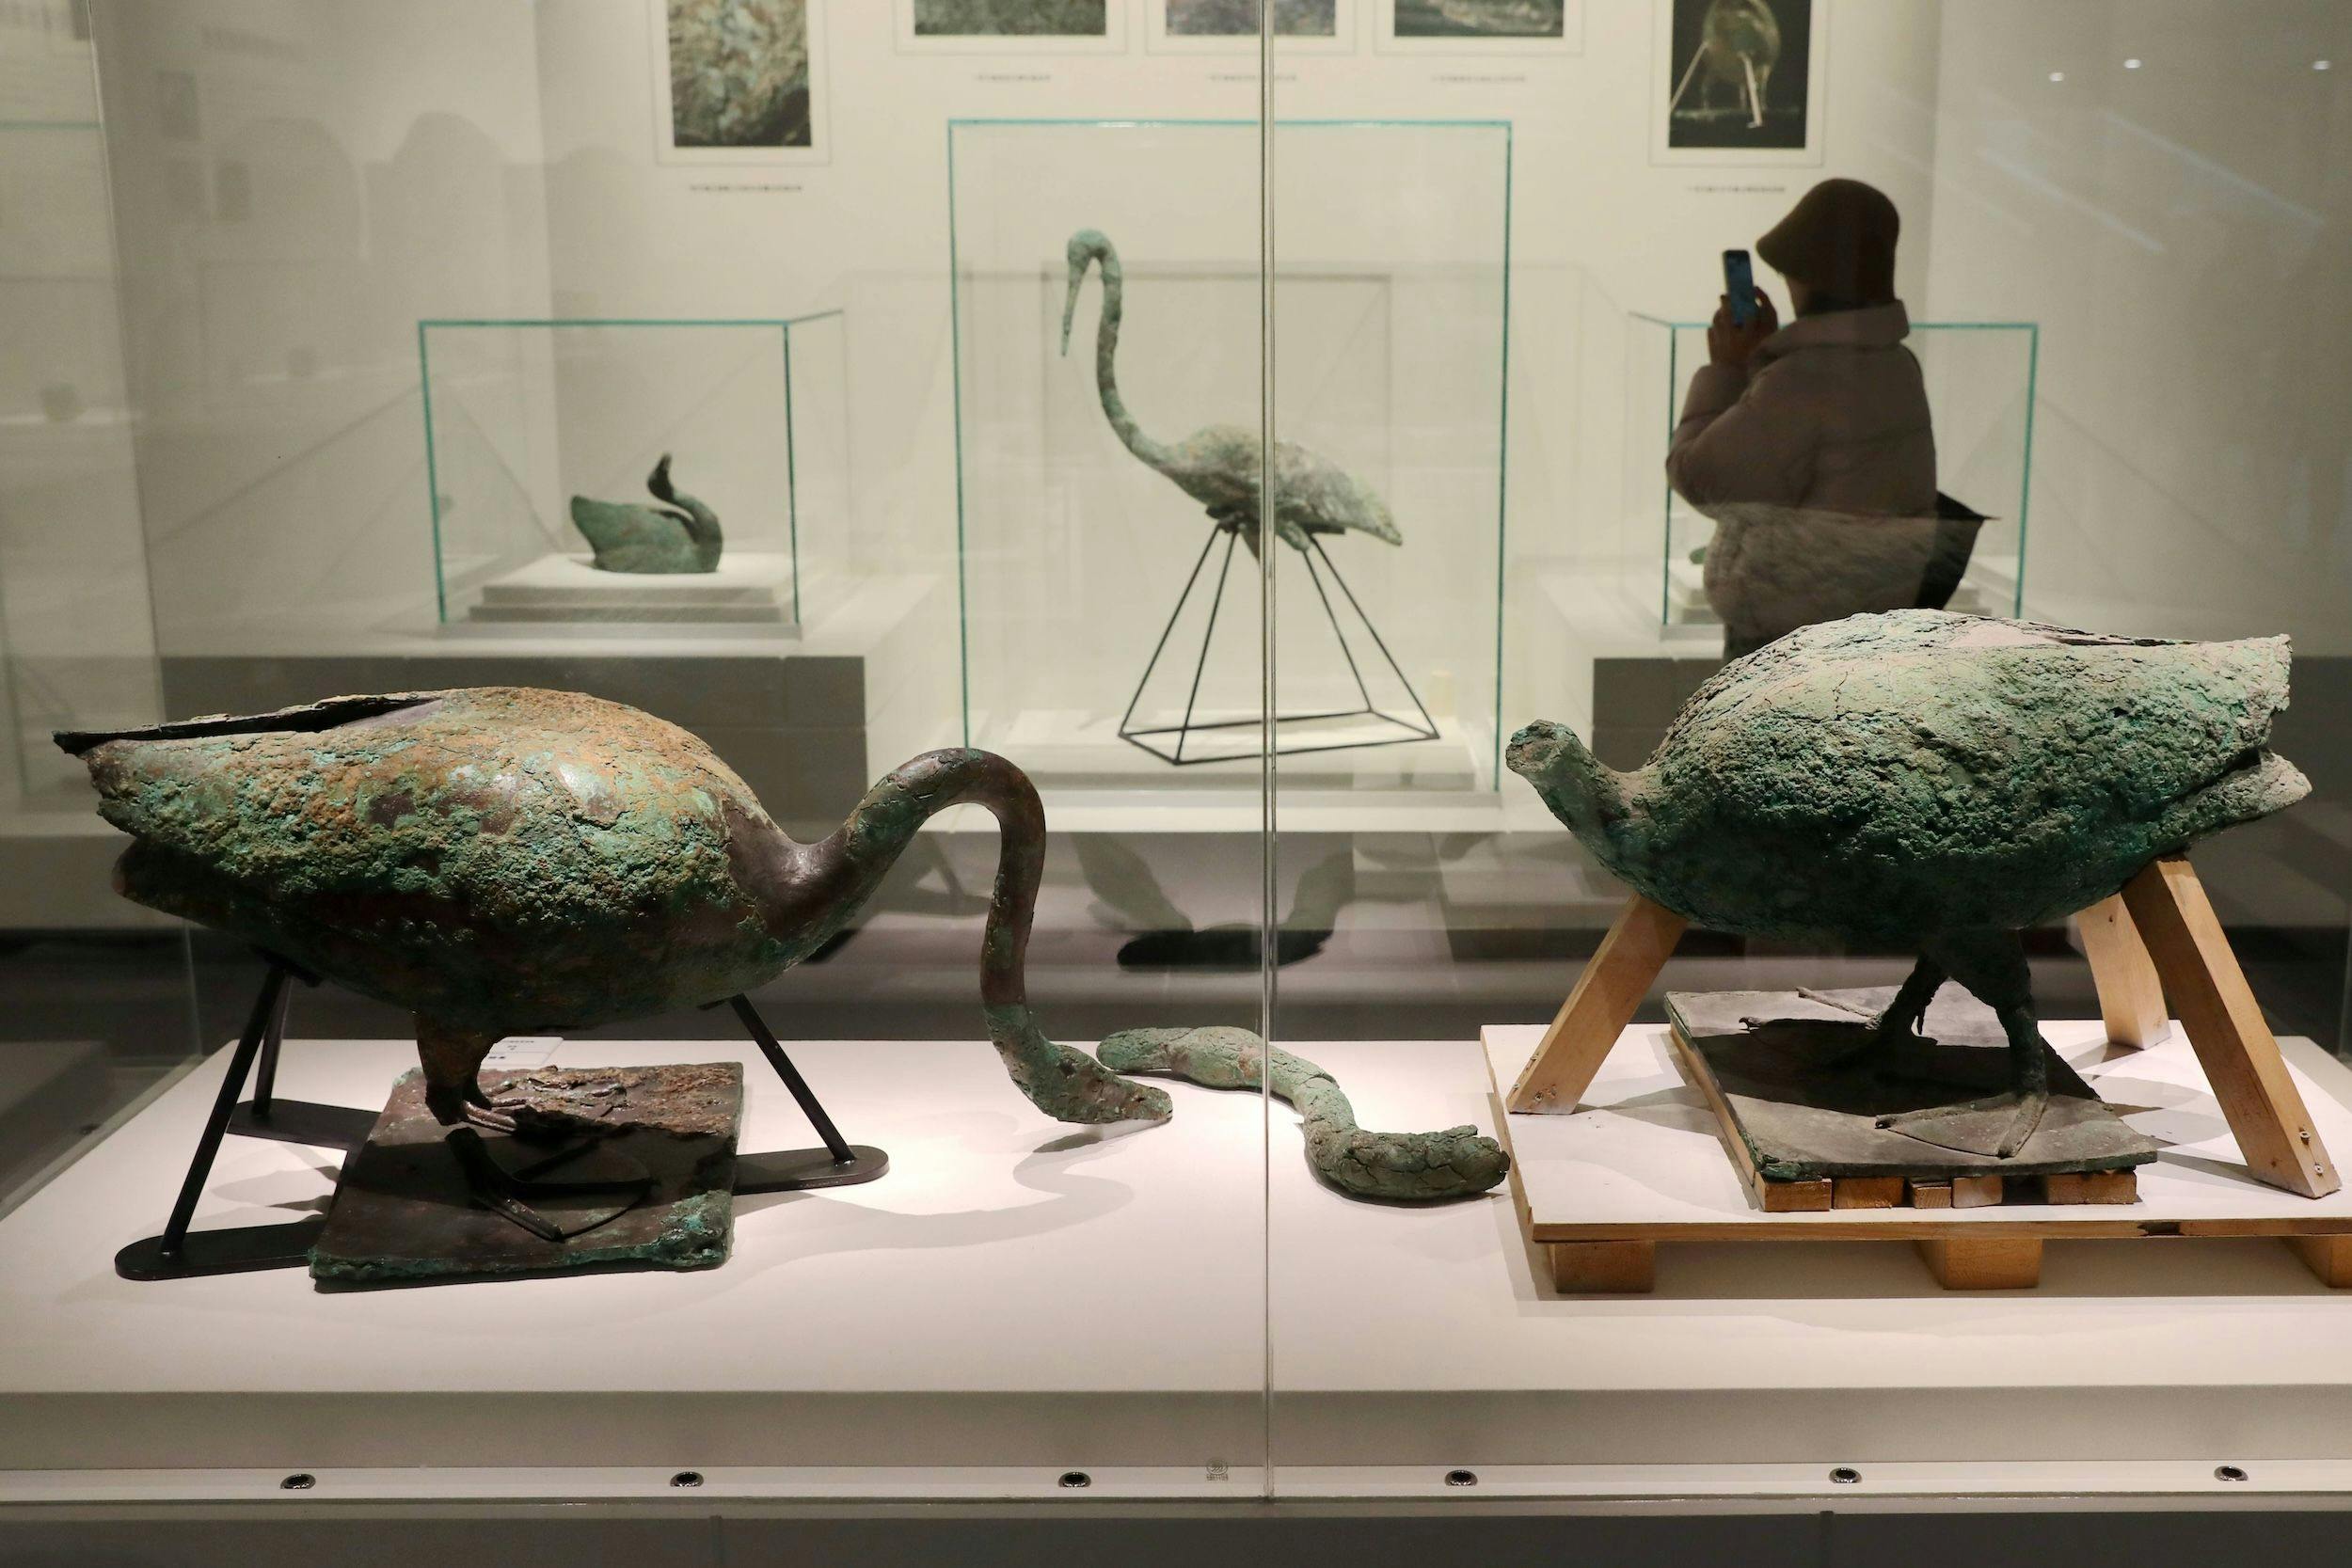 Bronze aquatic birds unearthed at pit K0007 of Qingshihuang Mausoleum are on display at Emperor Qinshihuang s Mausoleum Site Museum 